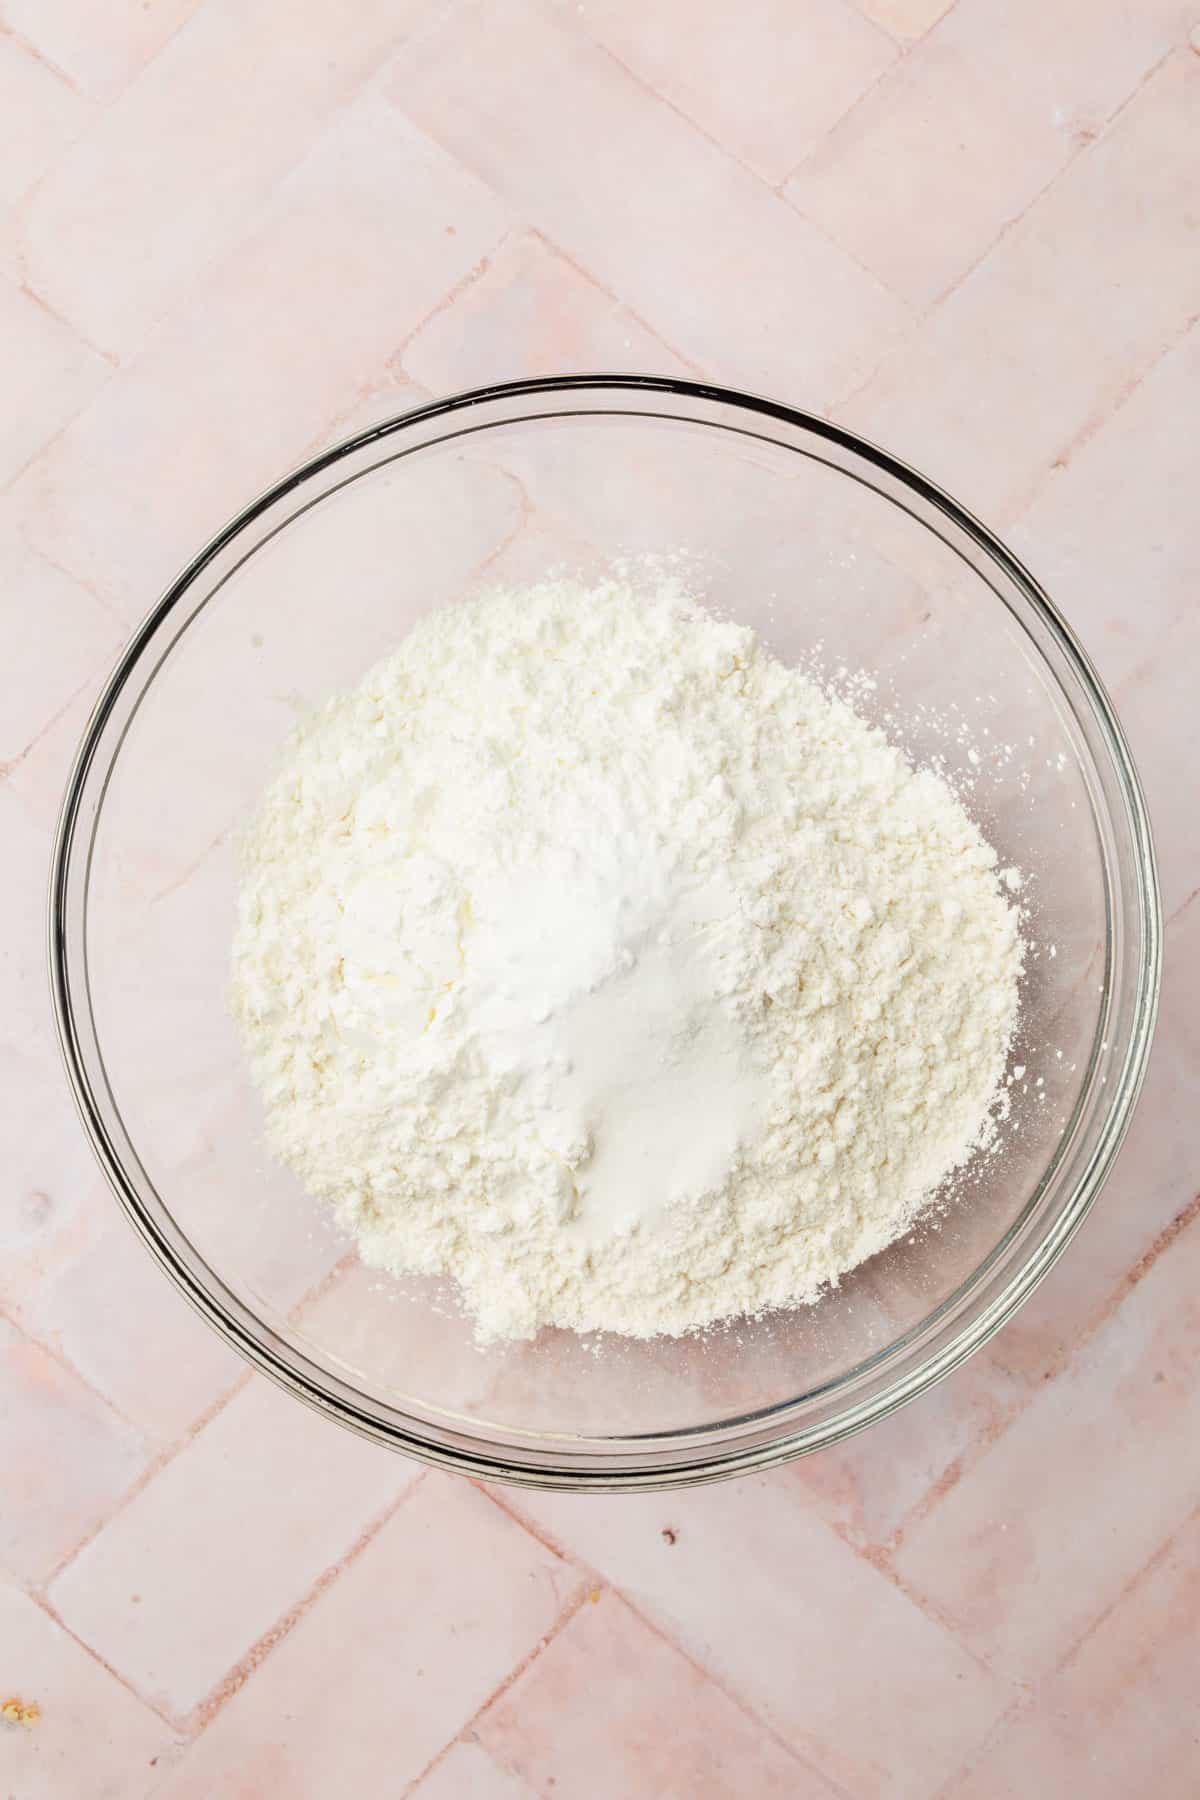 A glass mixing bowl with gluten-free flour blend, cornstarch, salt, baking powder, and baking soda in it before mixing.